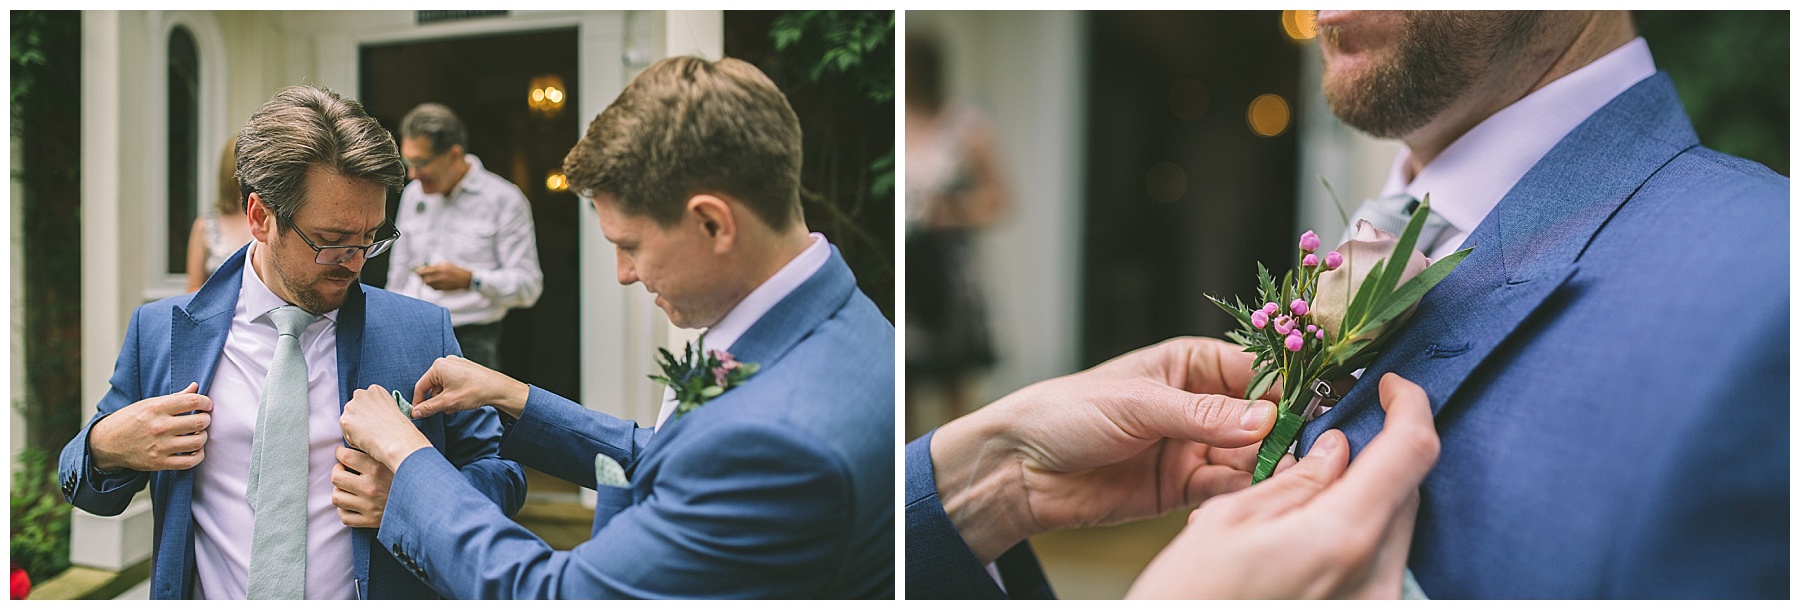 Best man helps the groom with his button hole from The Flower Lounge